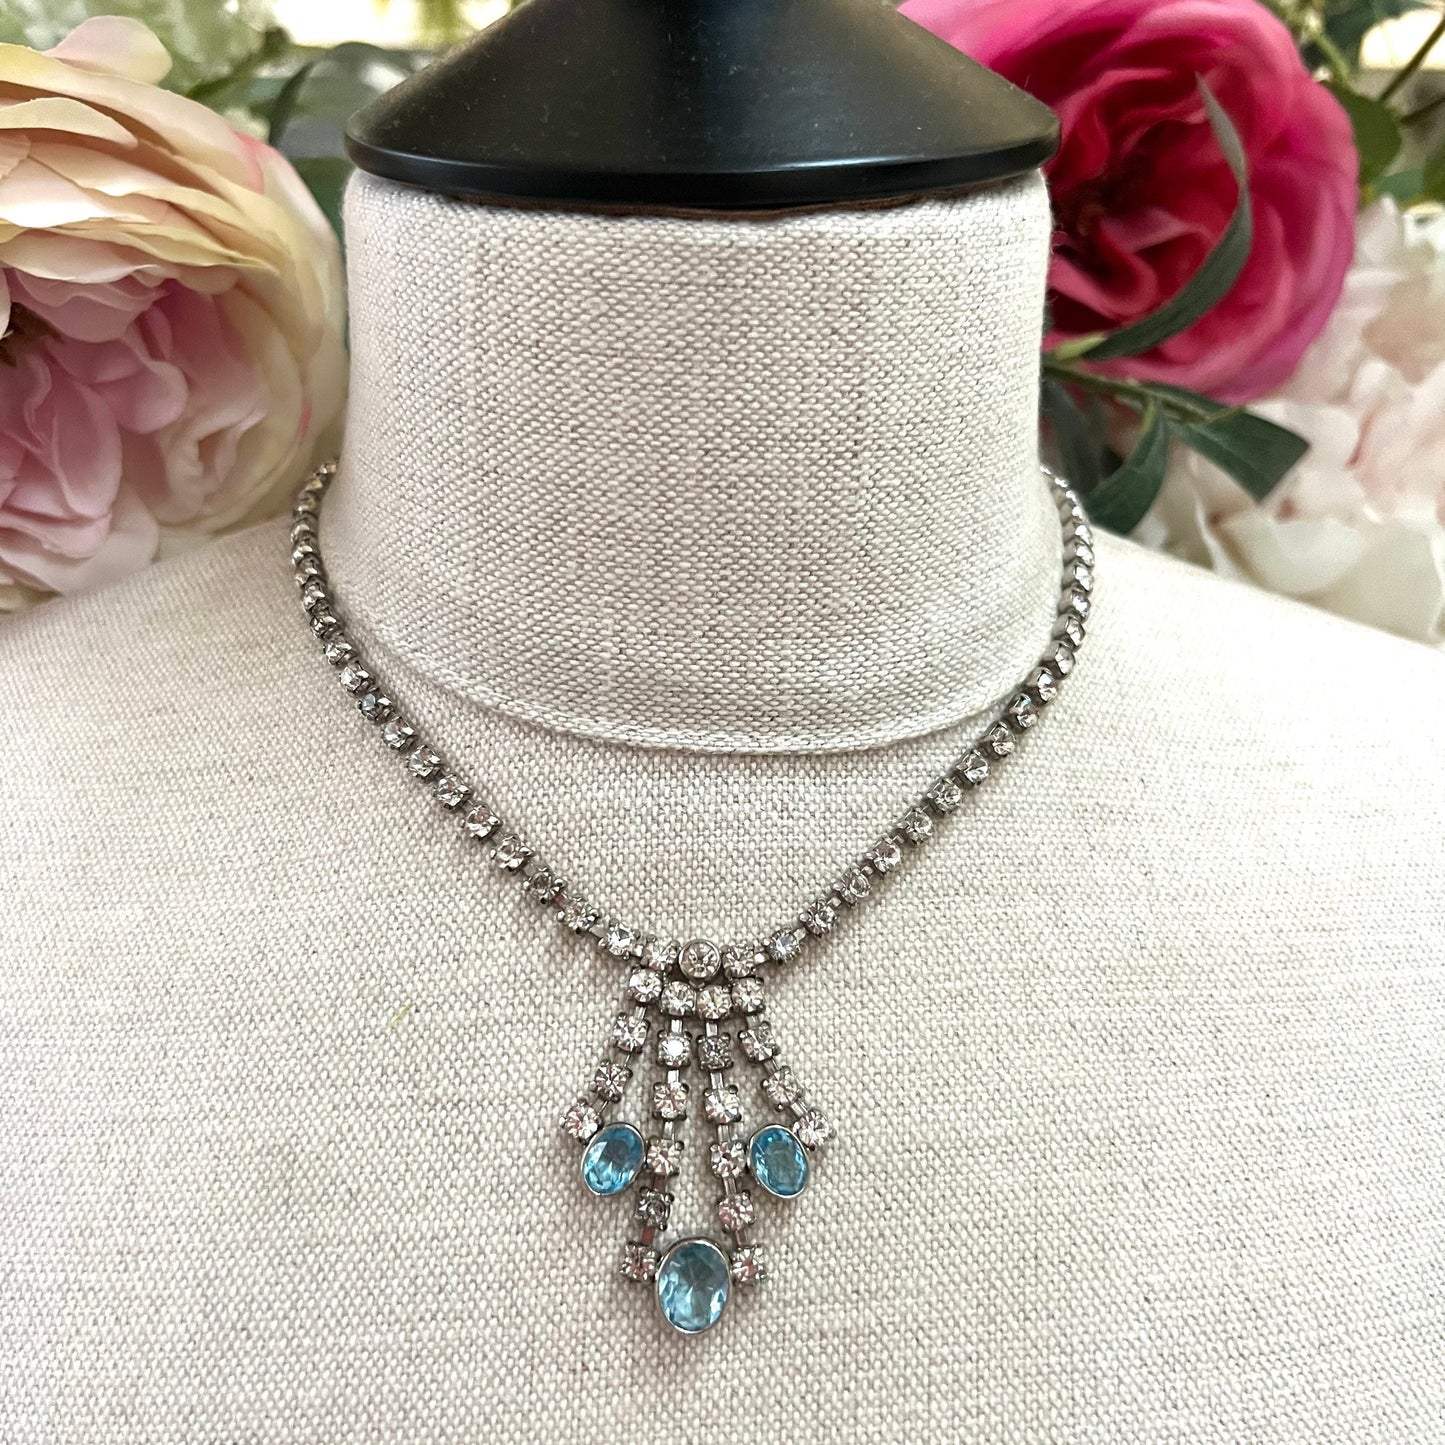 1950's Blue and Clear Rhinestone Necklace